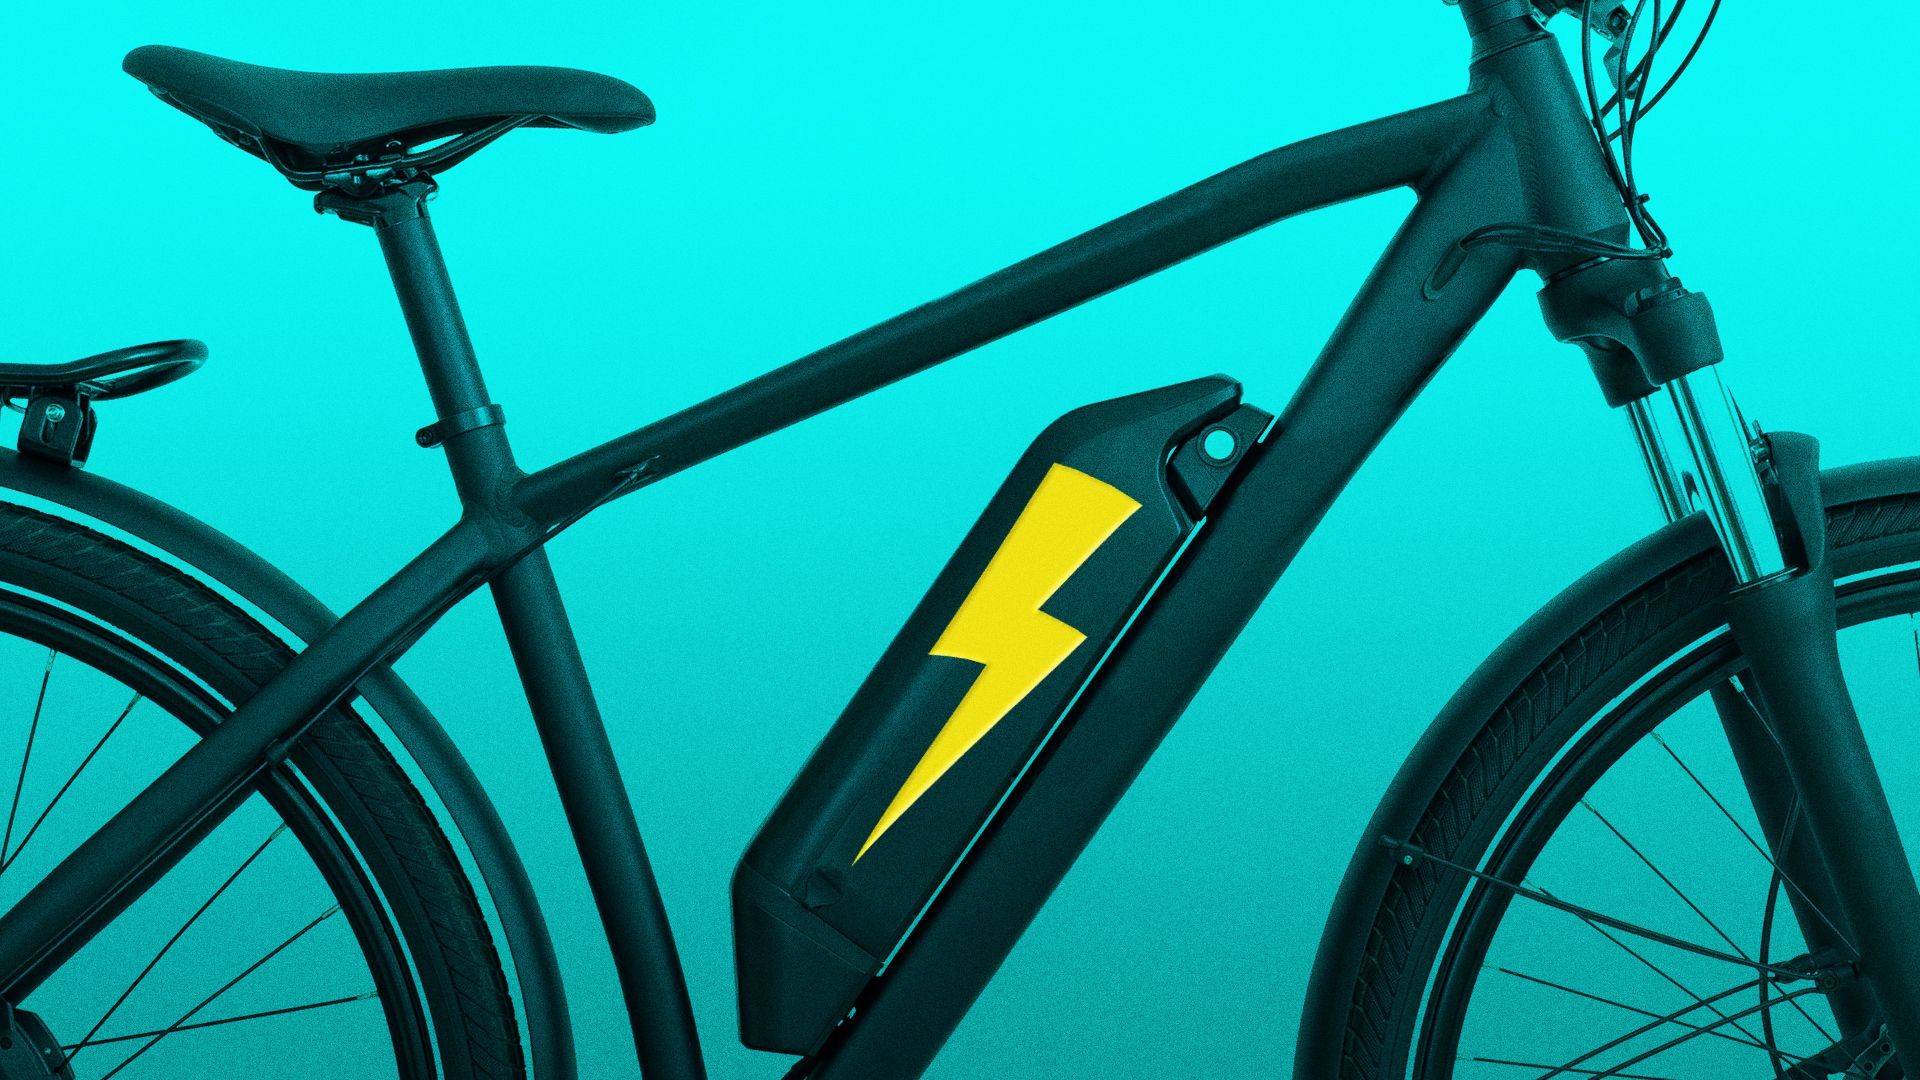 Illustration of an electric bike with a lightning bolt on the frame.